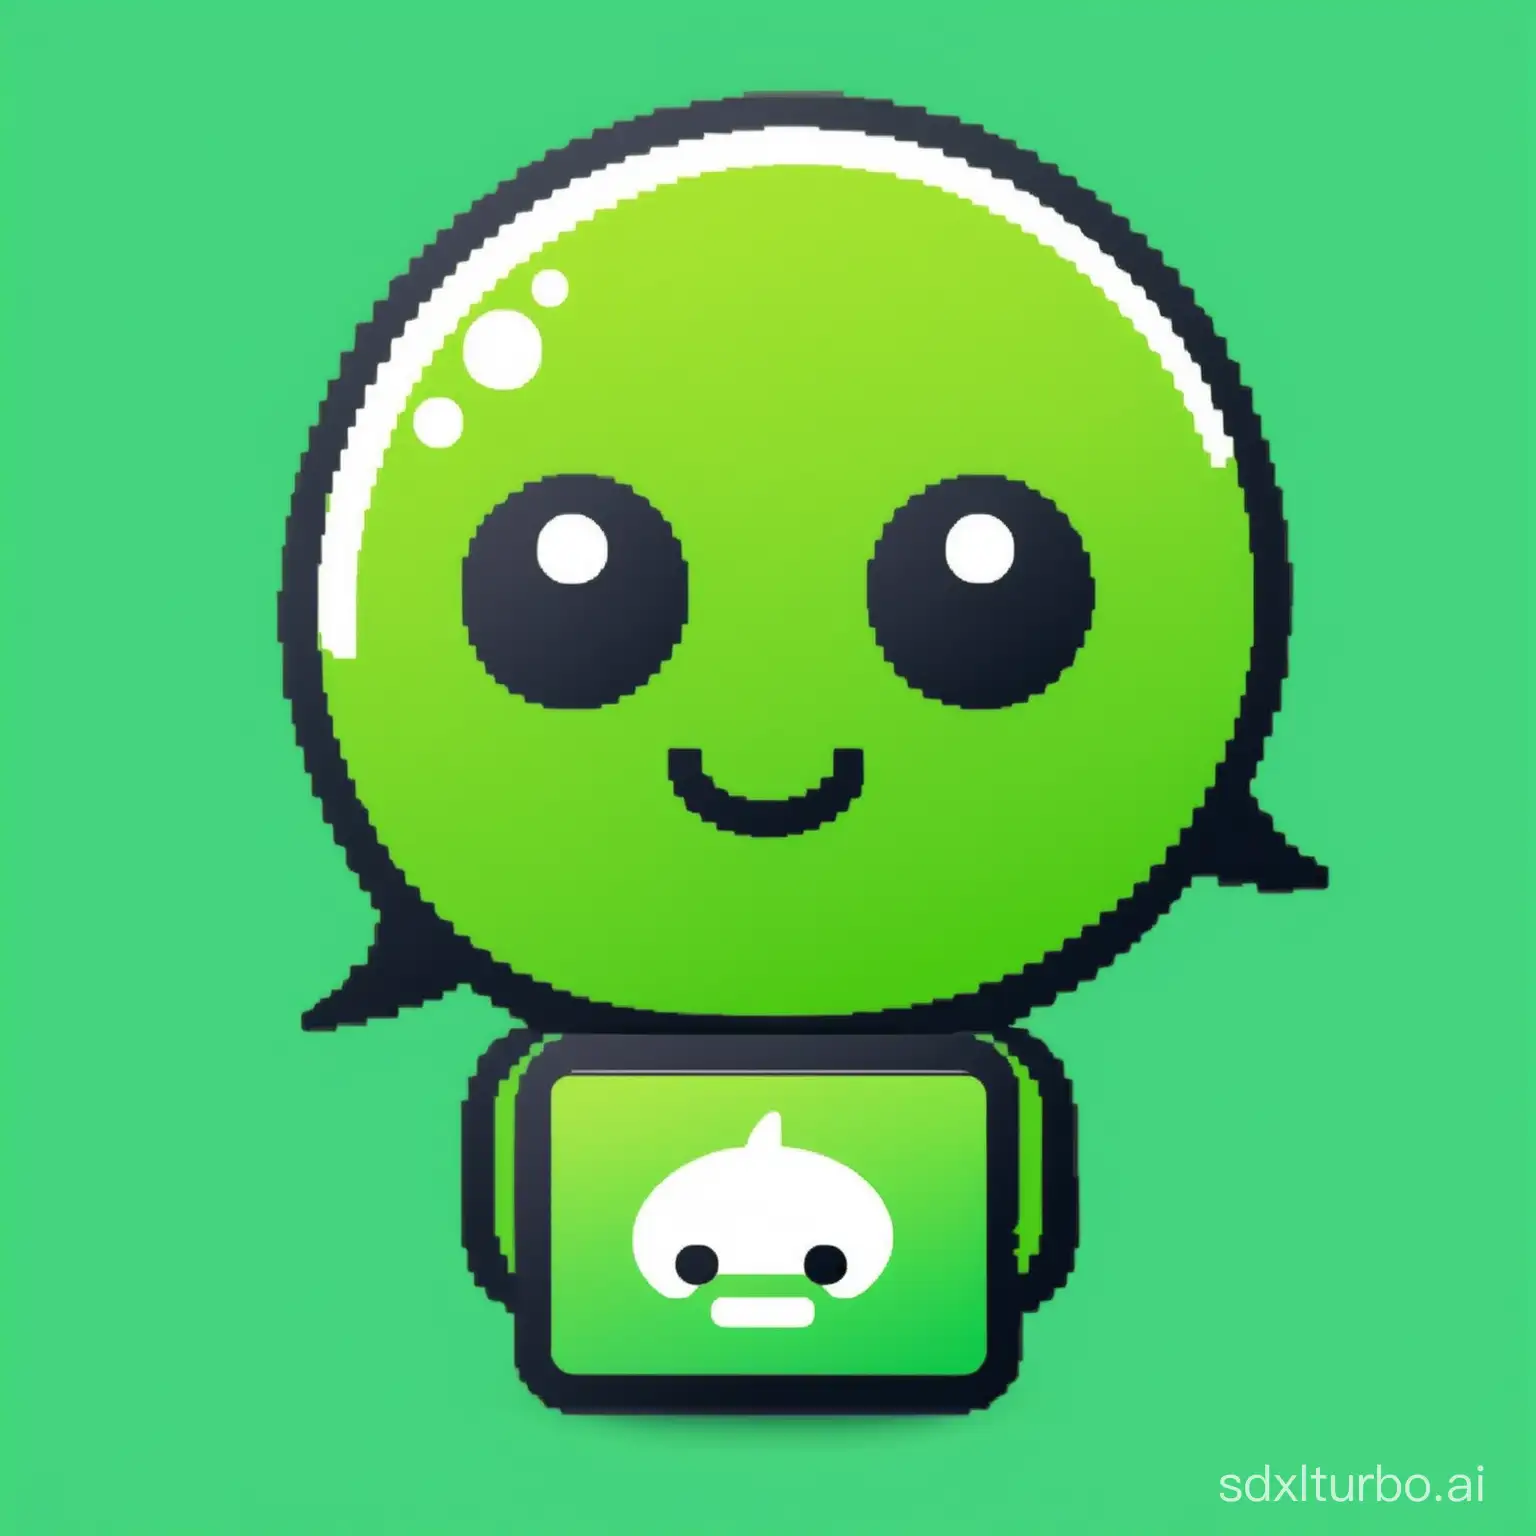 Interactive-Chat-Exploring-Conversational-AI-with-a-WeChat-Bot